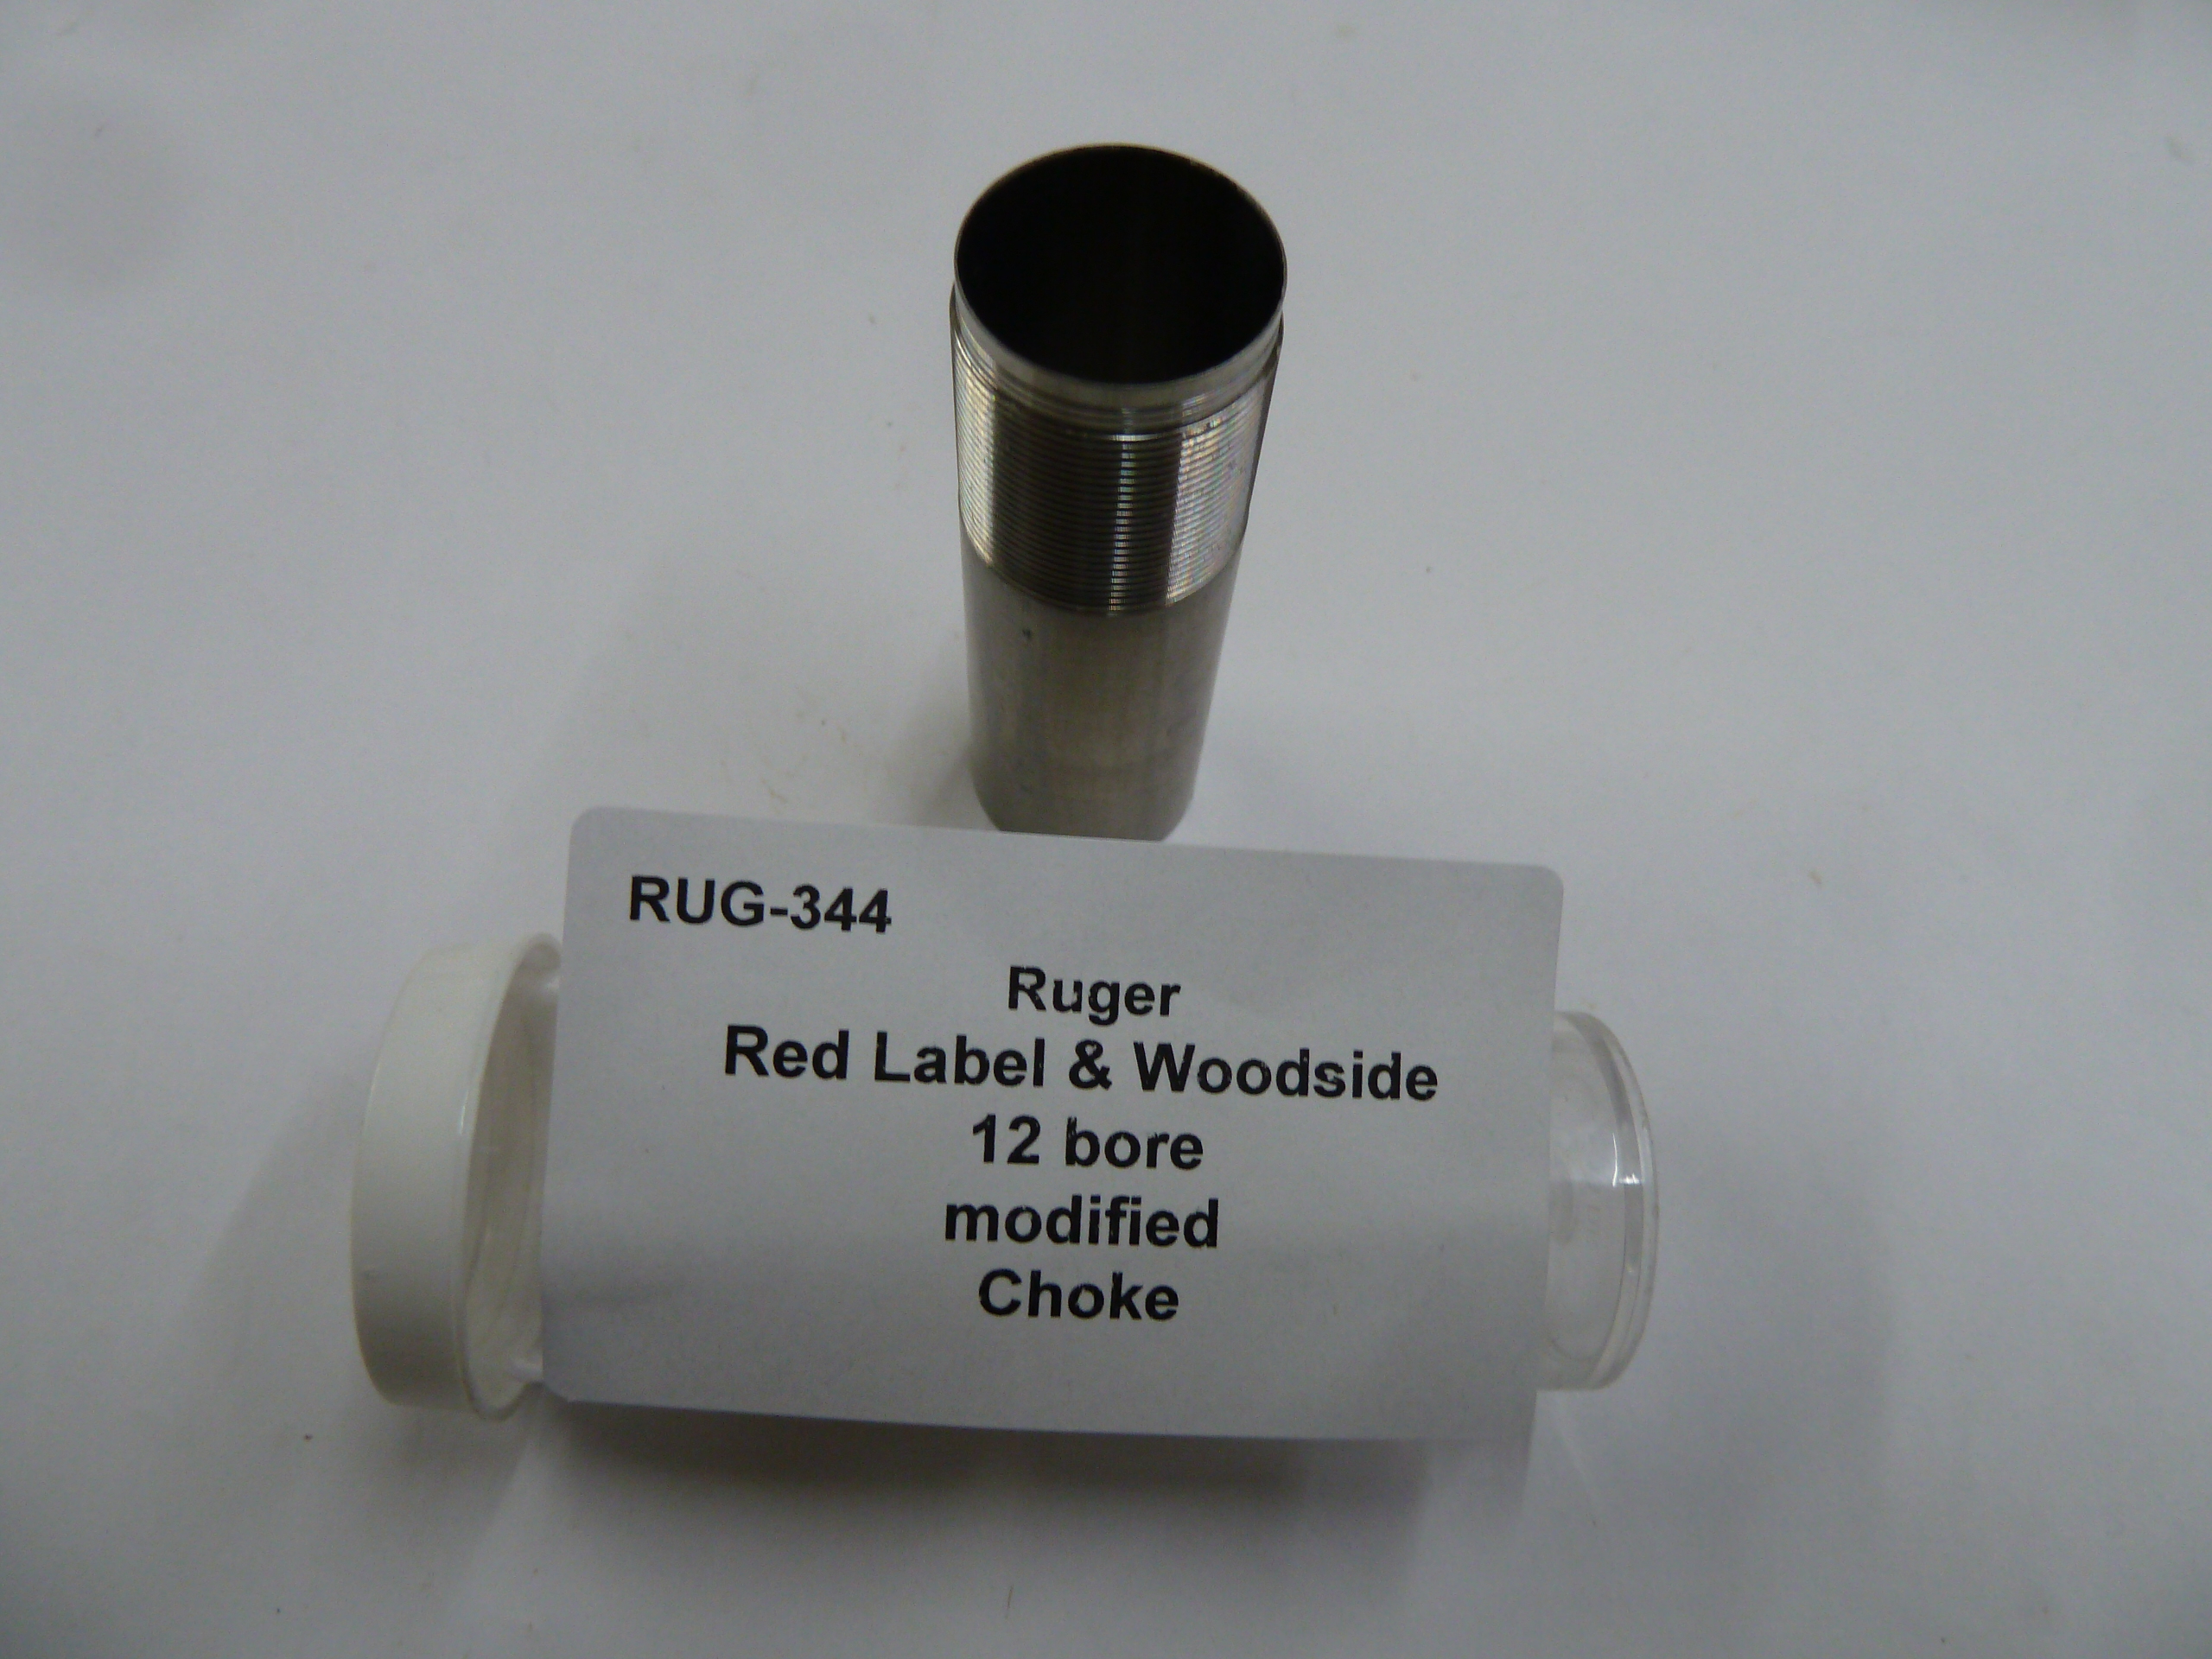 RUG-344 Ruger red label and woddside 12 bore modified choke (2)